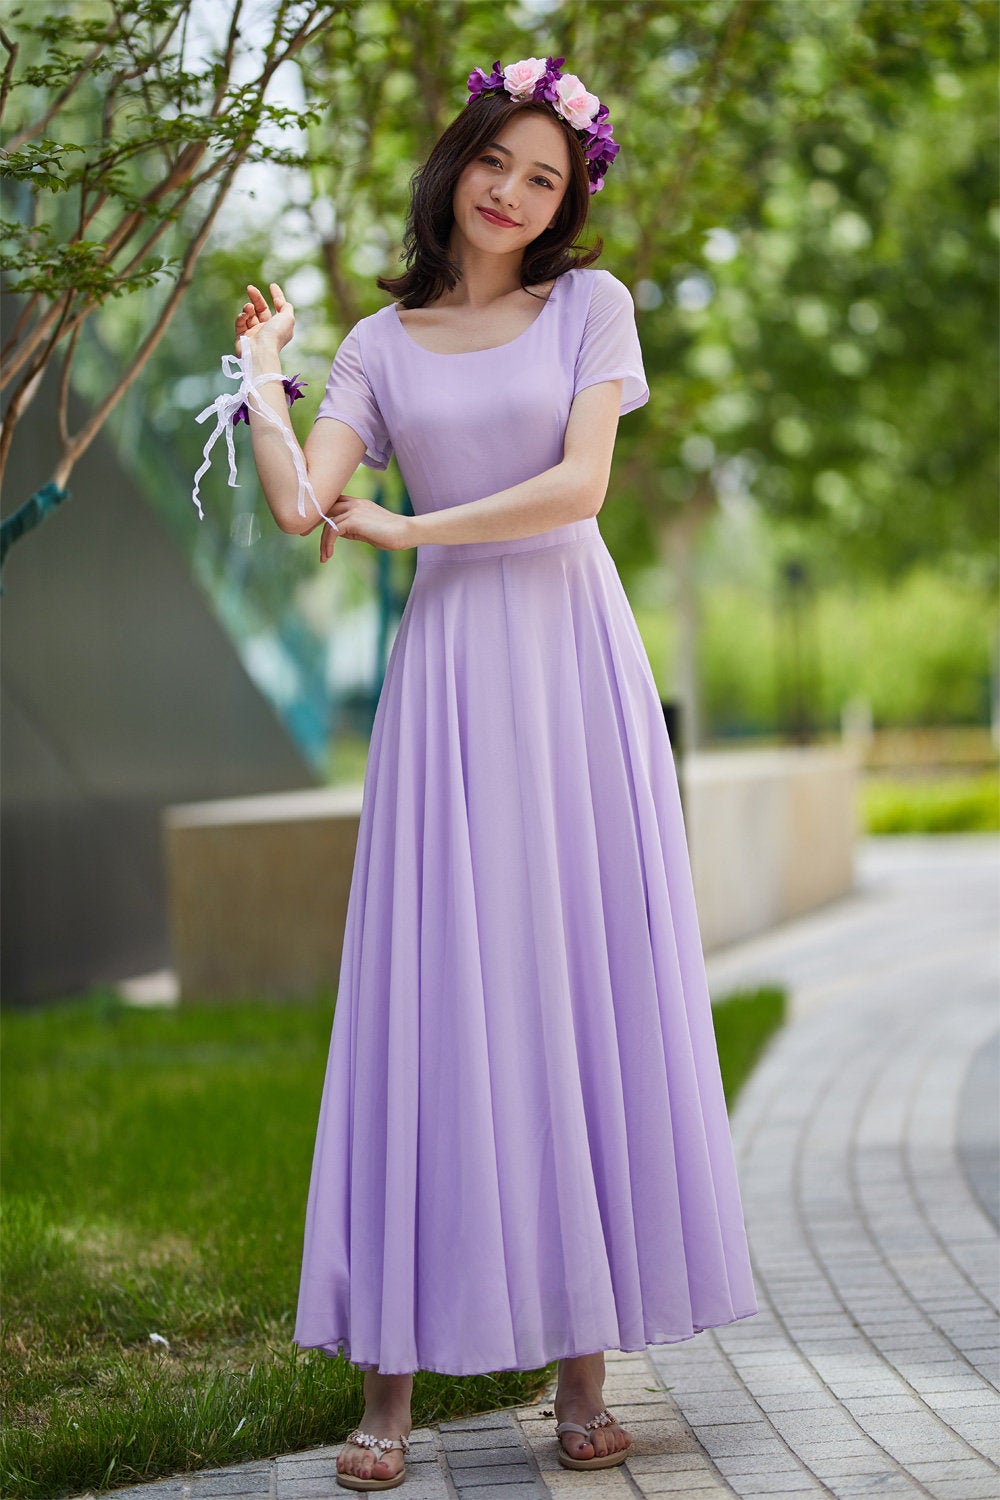 Purple Crystal Rhinestone Mermaid Purple Evening Dress With Backless Design  And Jewel Neckline Perfect For Prom, Pageants, And Special Occasions From  Lovemydress, $86.1 | DHgate.Com